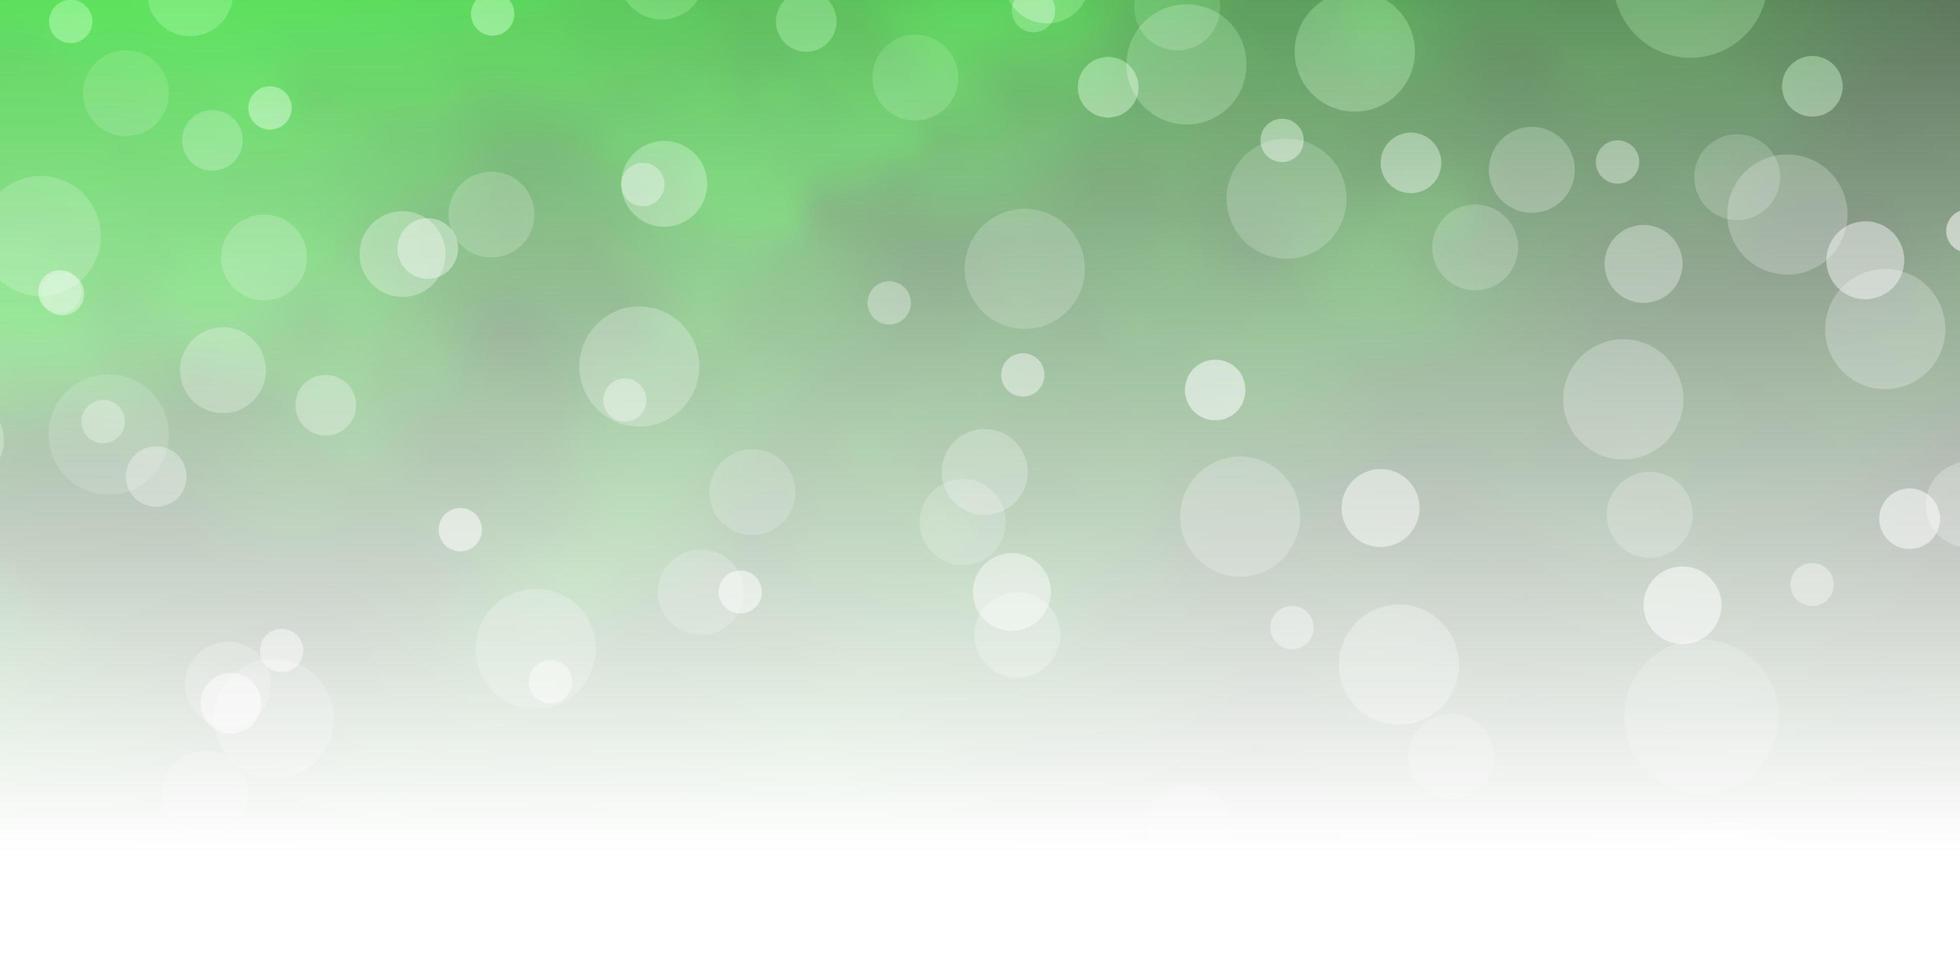 Light green texture with circles. vector